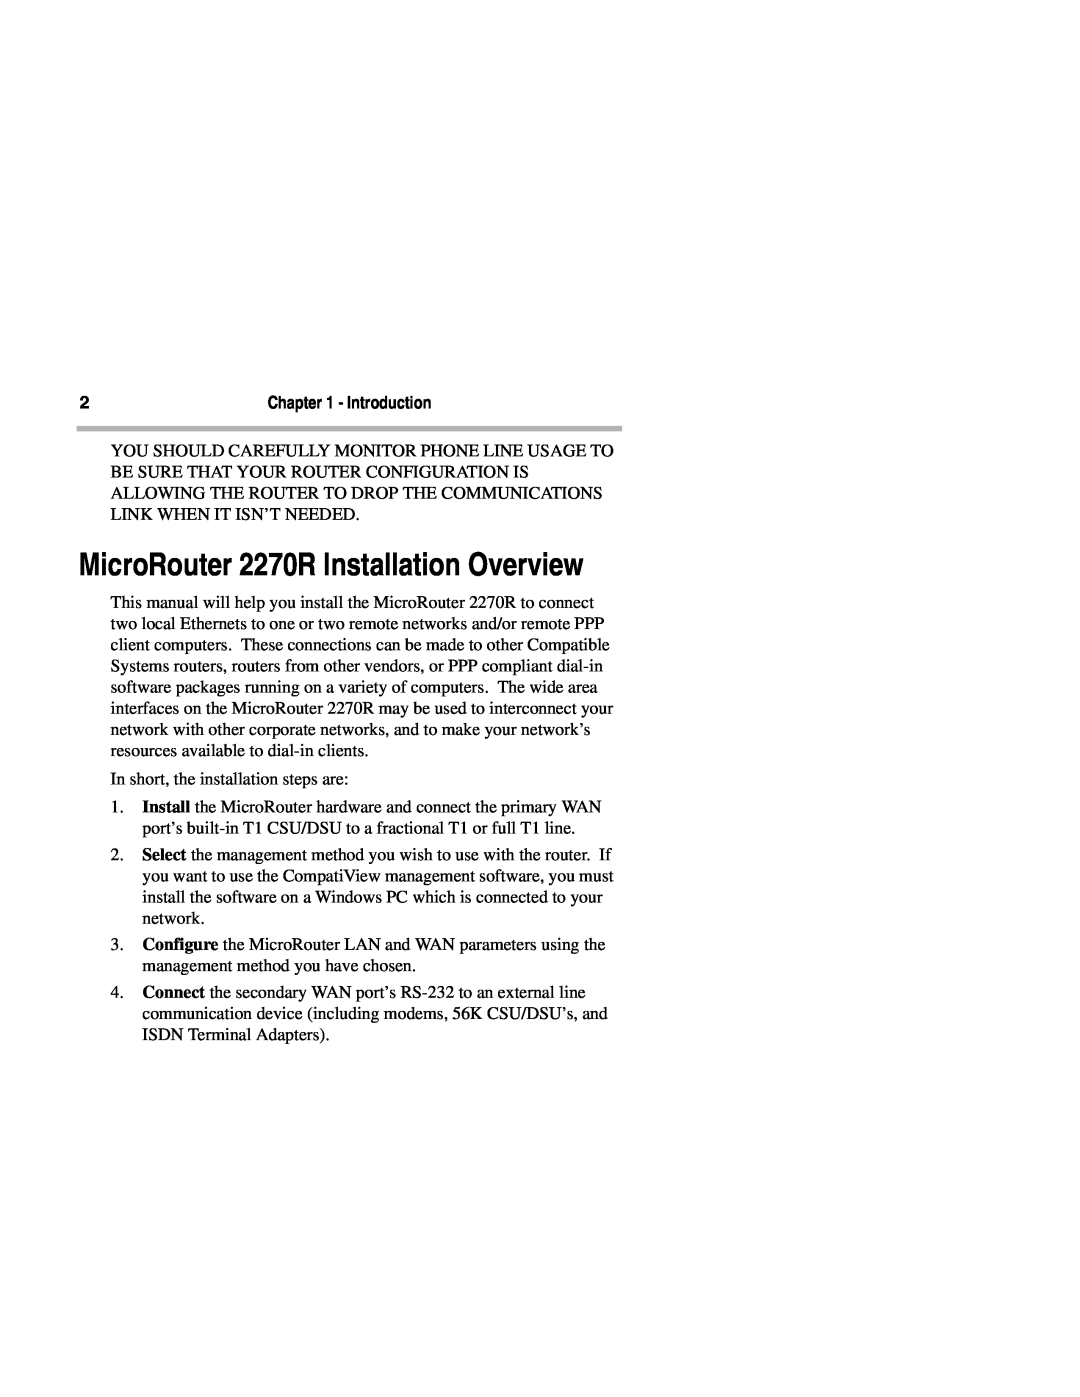 Compatible Systems manual MicroRouter 2270R Installation Overview, Introduction 